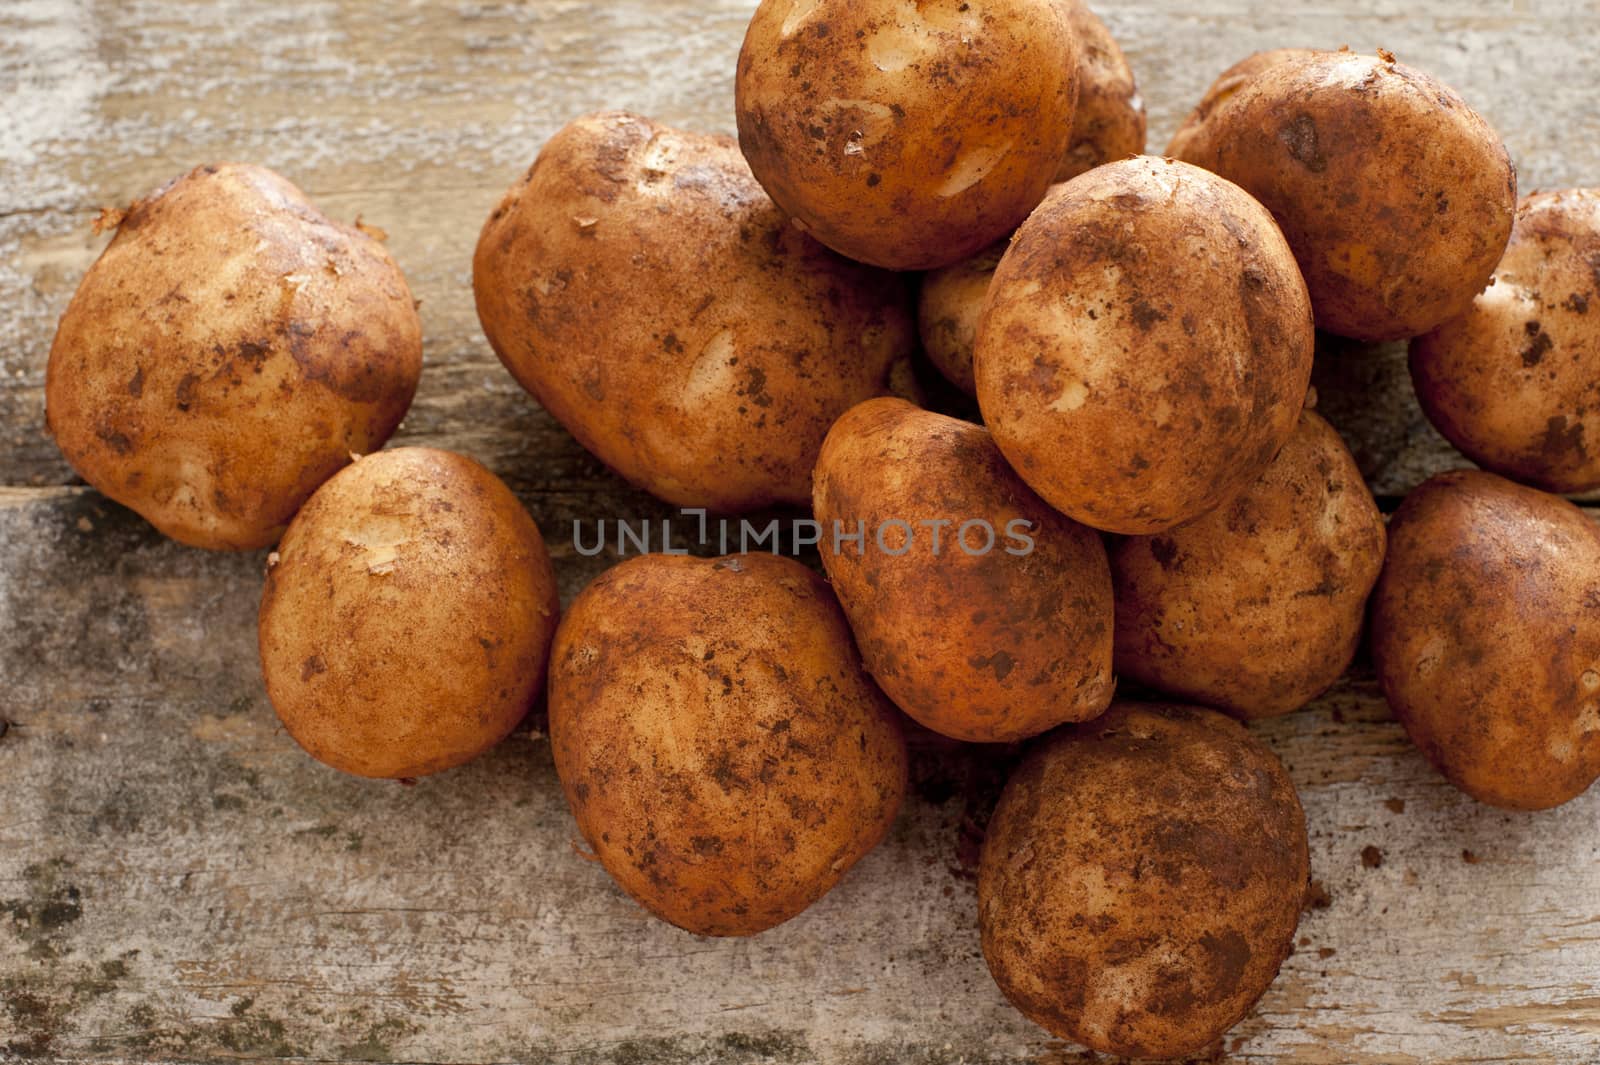 Farm fresh or home grown rustic potatoes covered in dirt in a heap on an old wooden kitchen table, high angle close up view